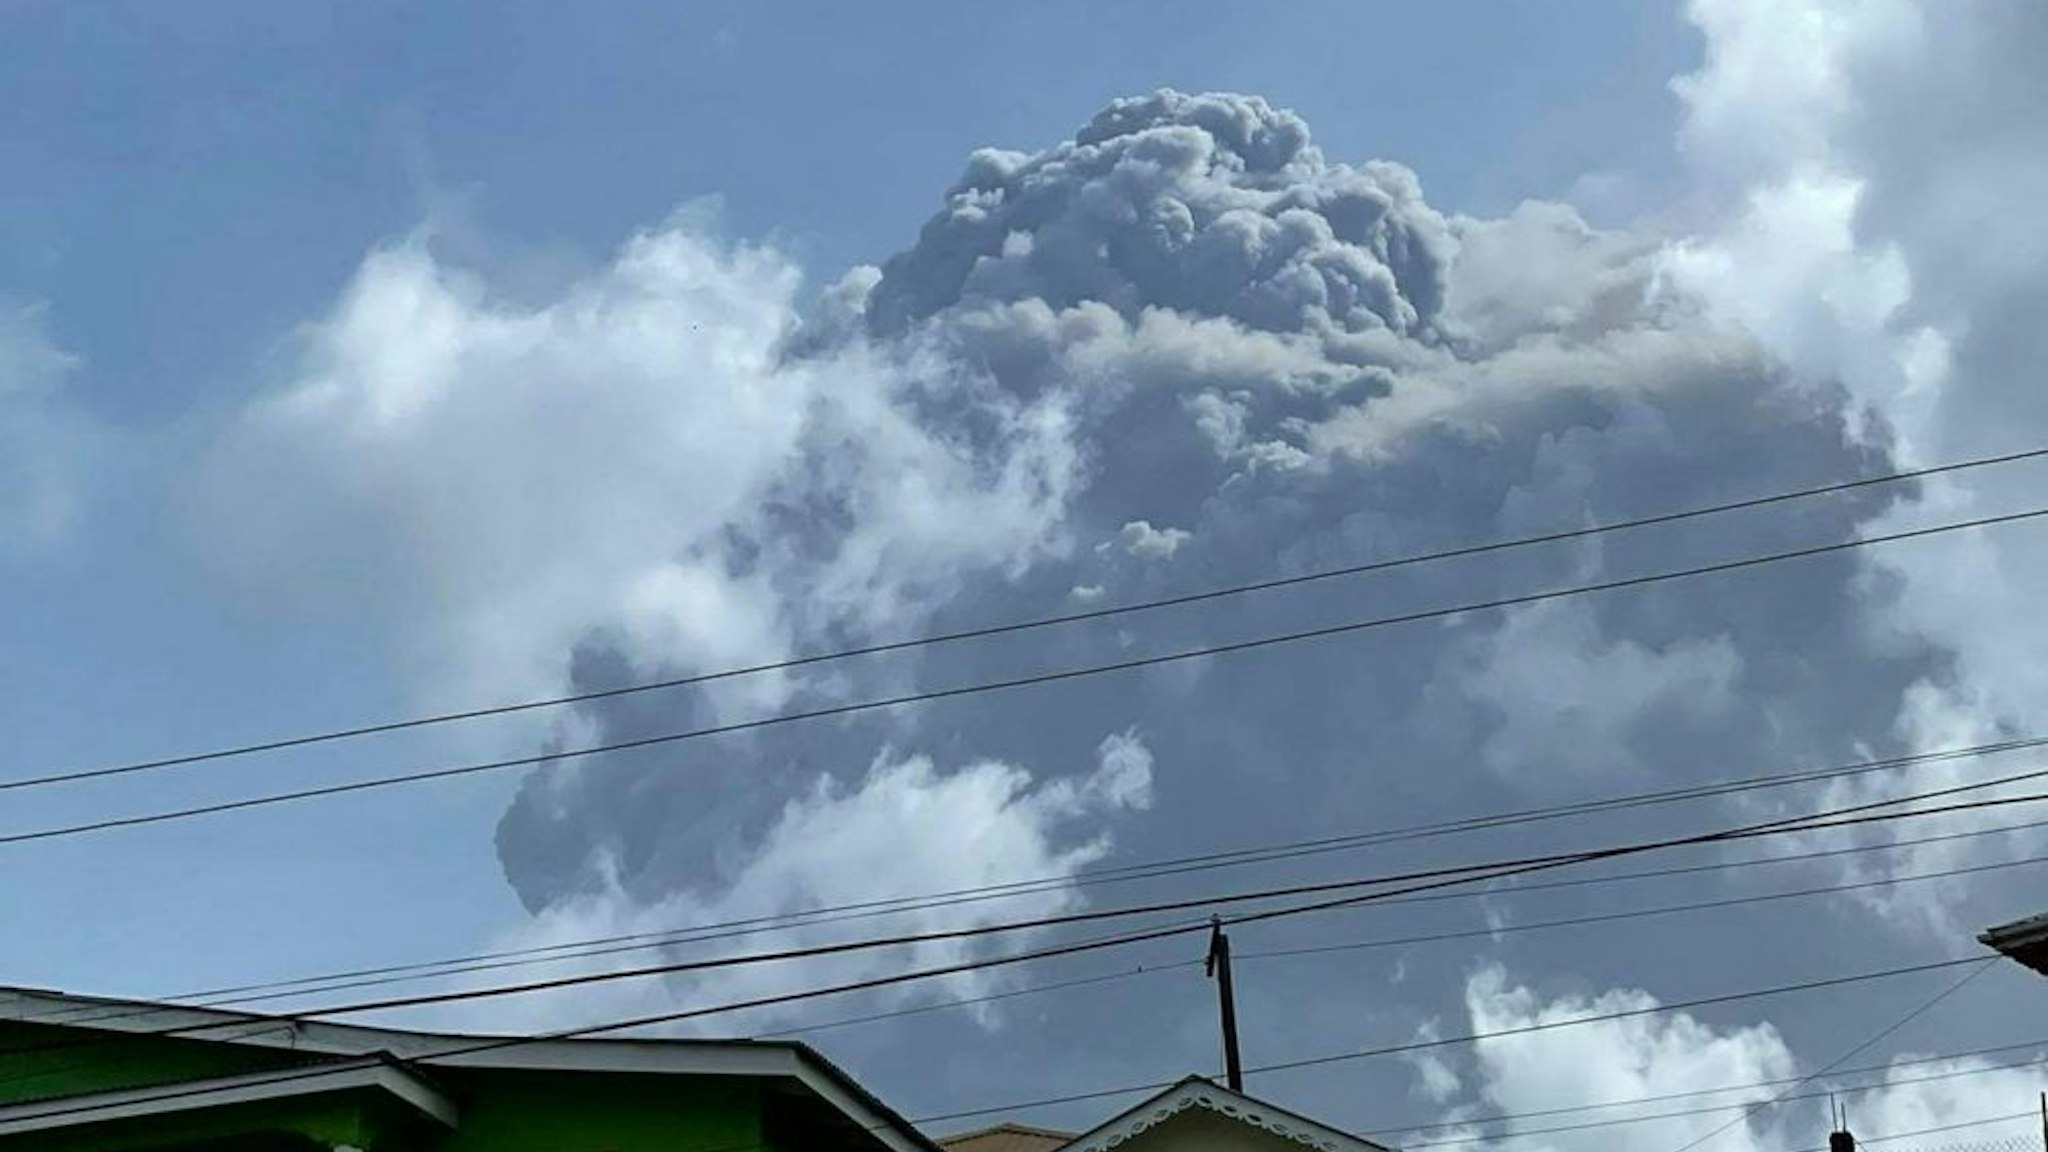 TOPSHOT - This April 9, 2021, image courtesy Zen Punnett shows the eruption of La Soufriere Volcano from Rillan Hill in Saint Vincent. - La Soufriere erupted Friday for the first time in 40 years on the Caribbean island of Saint Vincent, prompting thousands of people to evacuate, seismologists said. The blast from the volcano, sent plumes of ash 20,000 feet (6,000 meters) into the air, the local emergency management agency said. The eruption was confirmed by the UWI center.